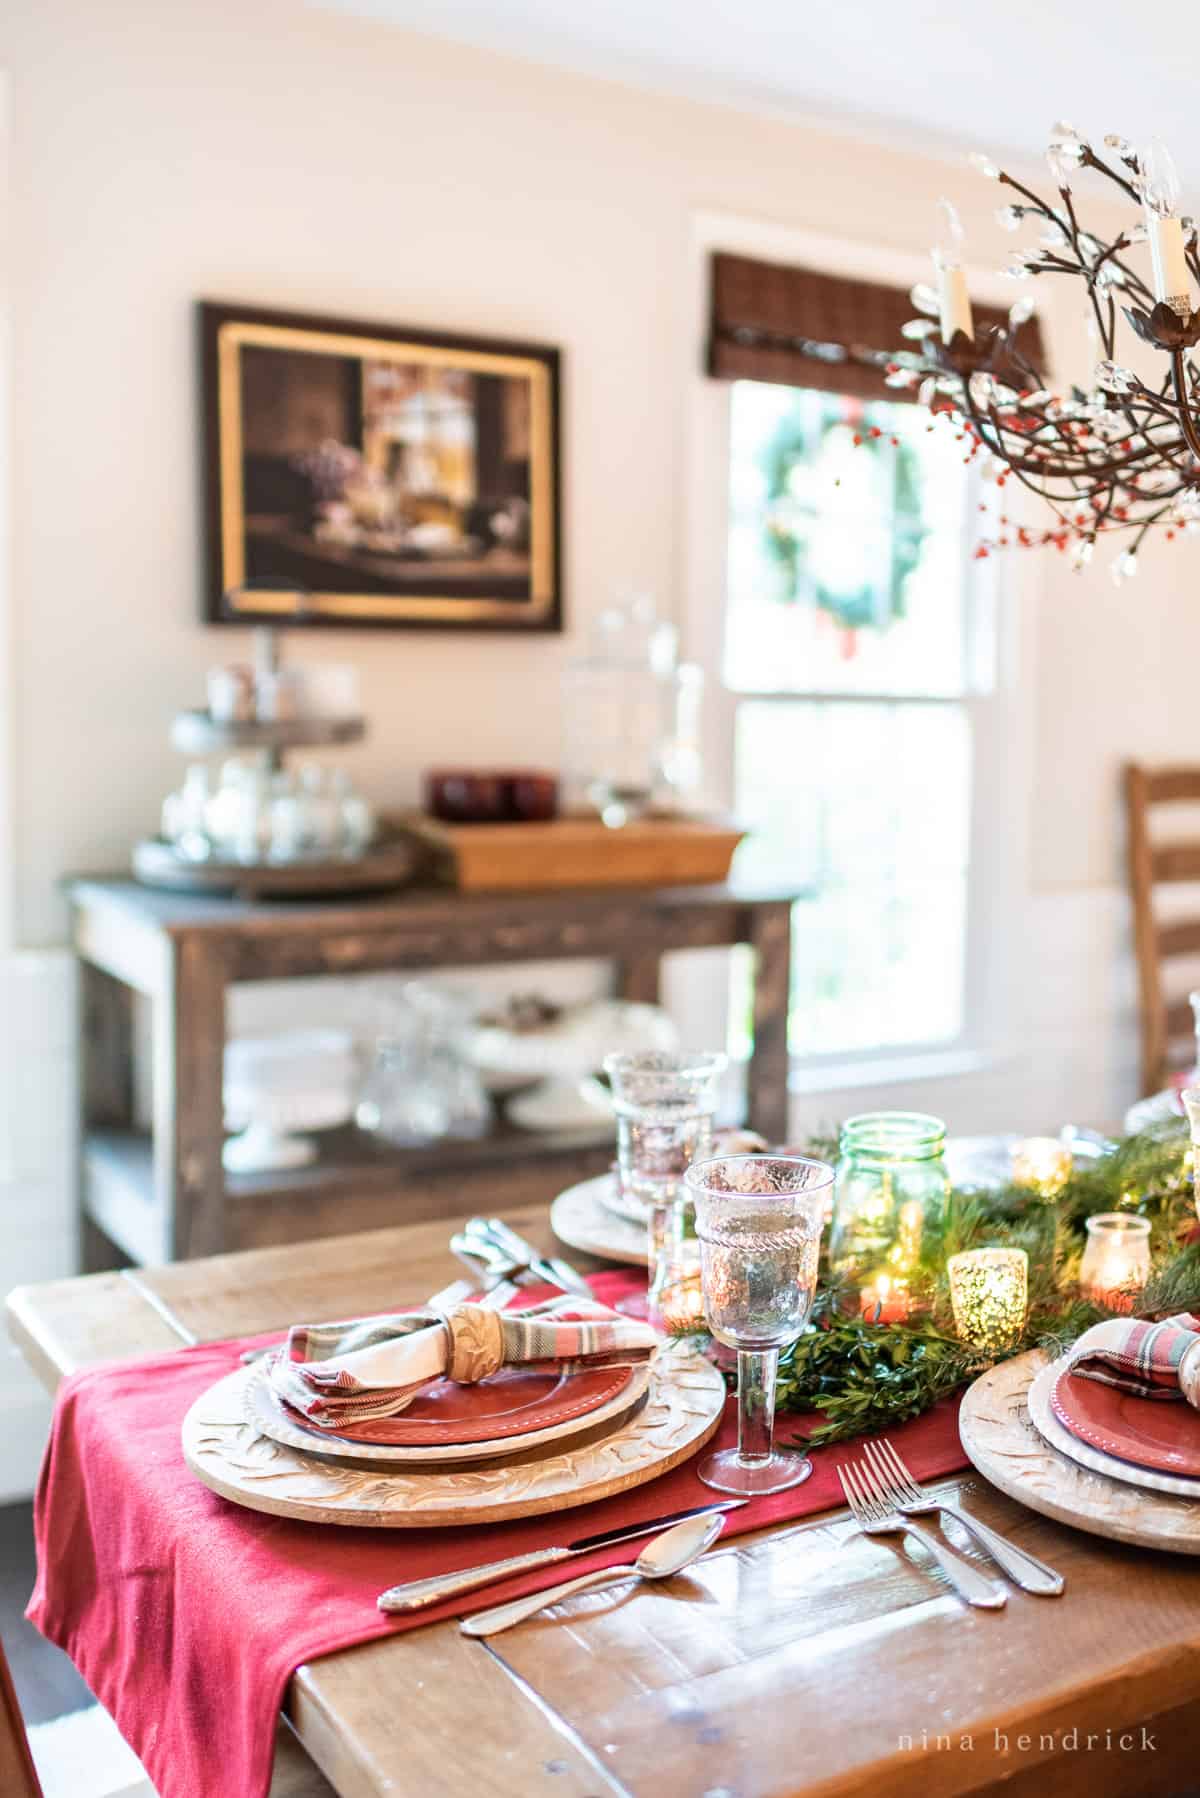 Rustic Christmas table setting with a brown wood cart in the background